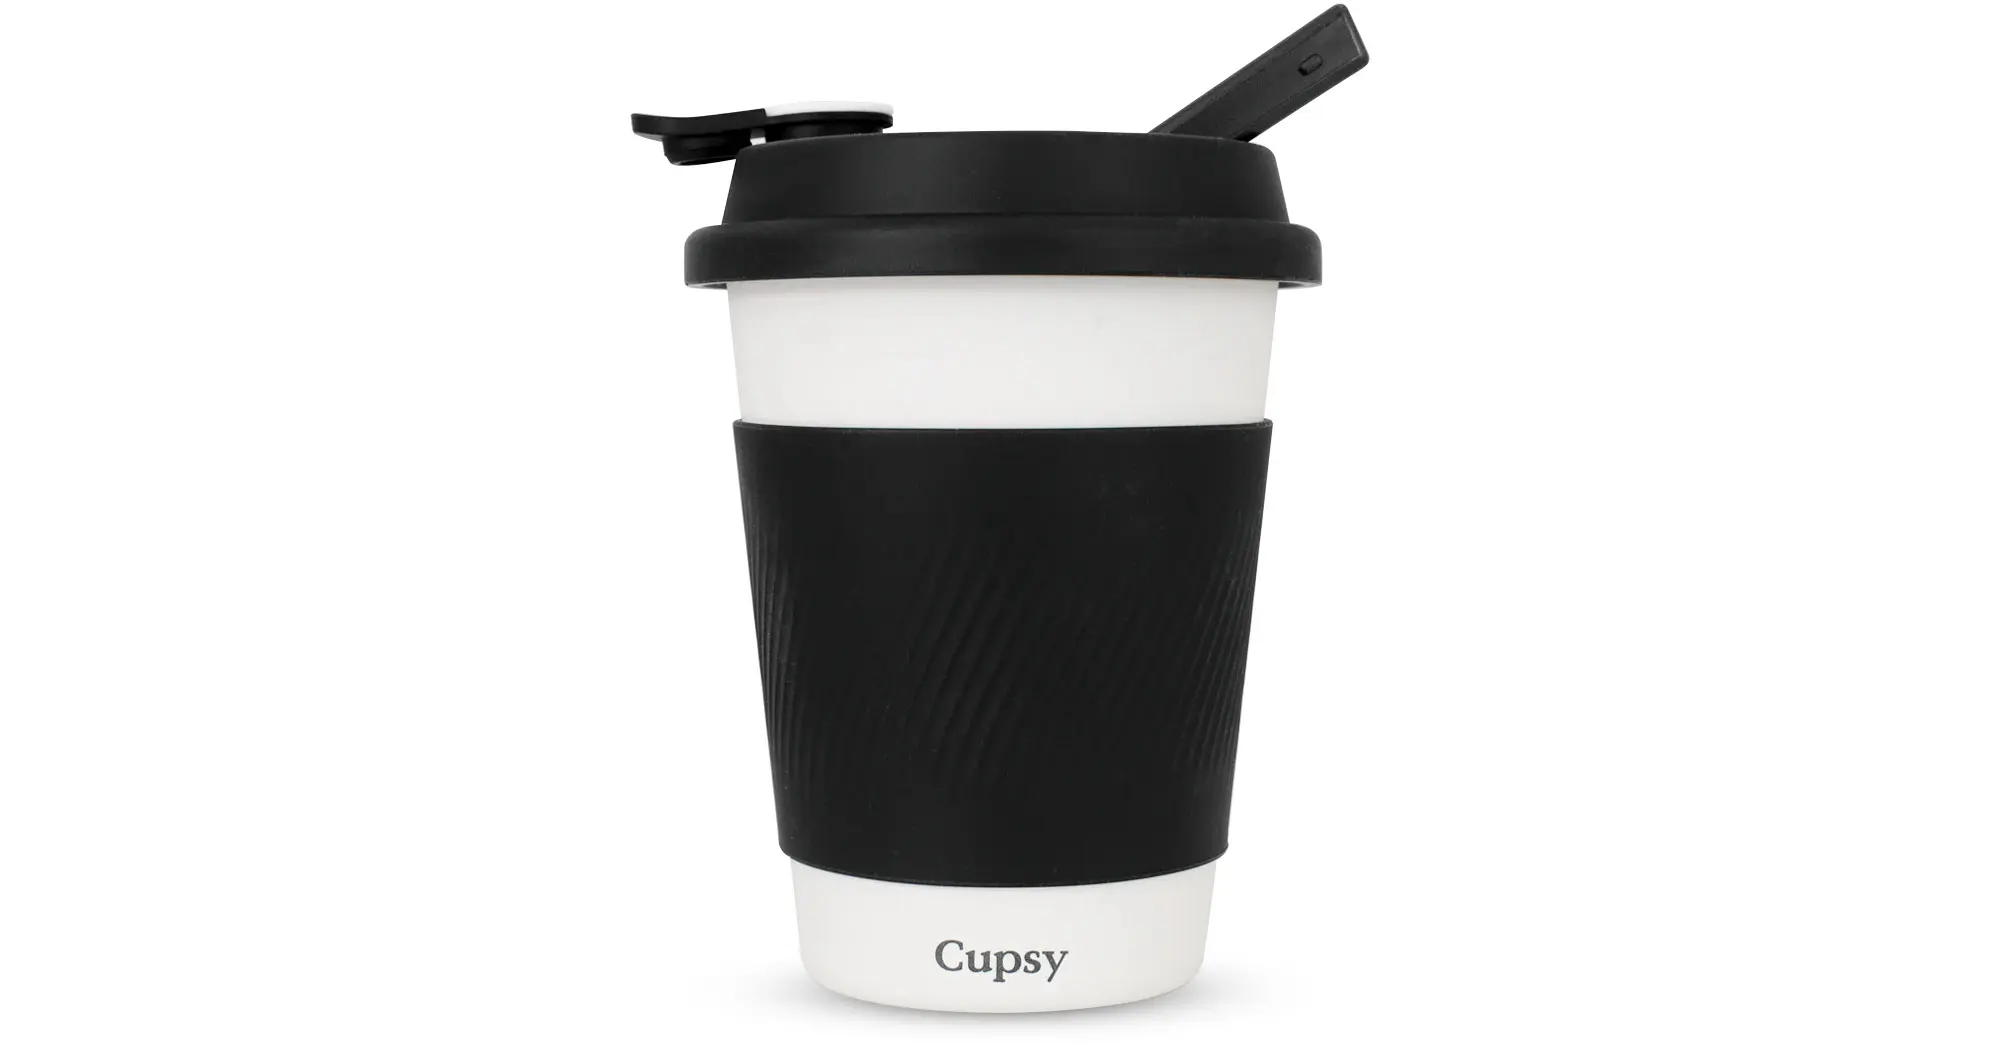 Cupsy